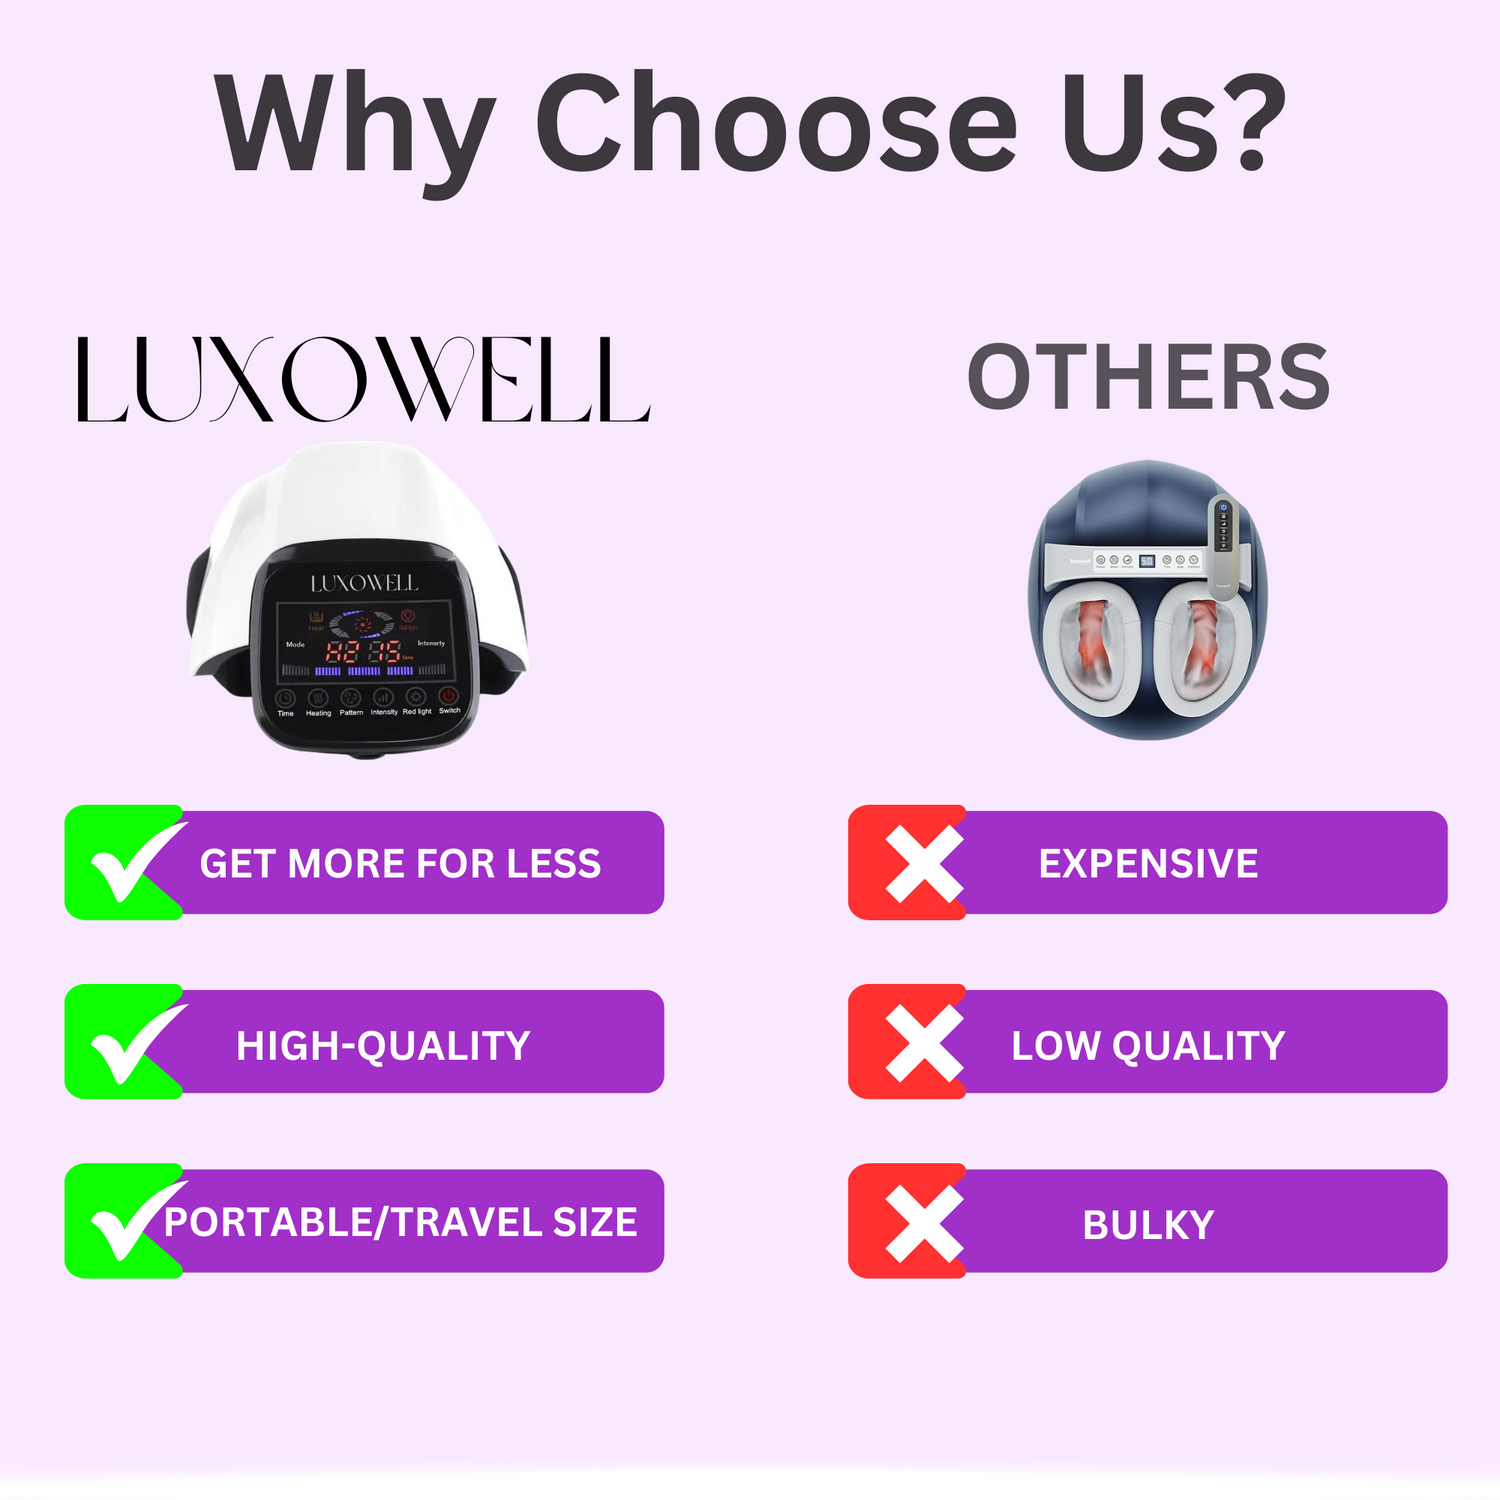 luxowell health product comparison vs others